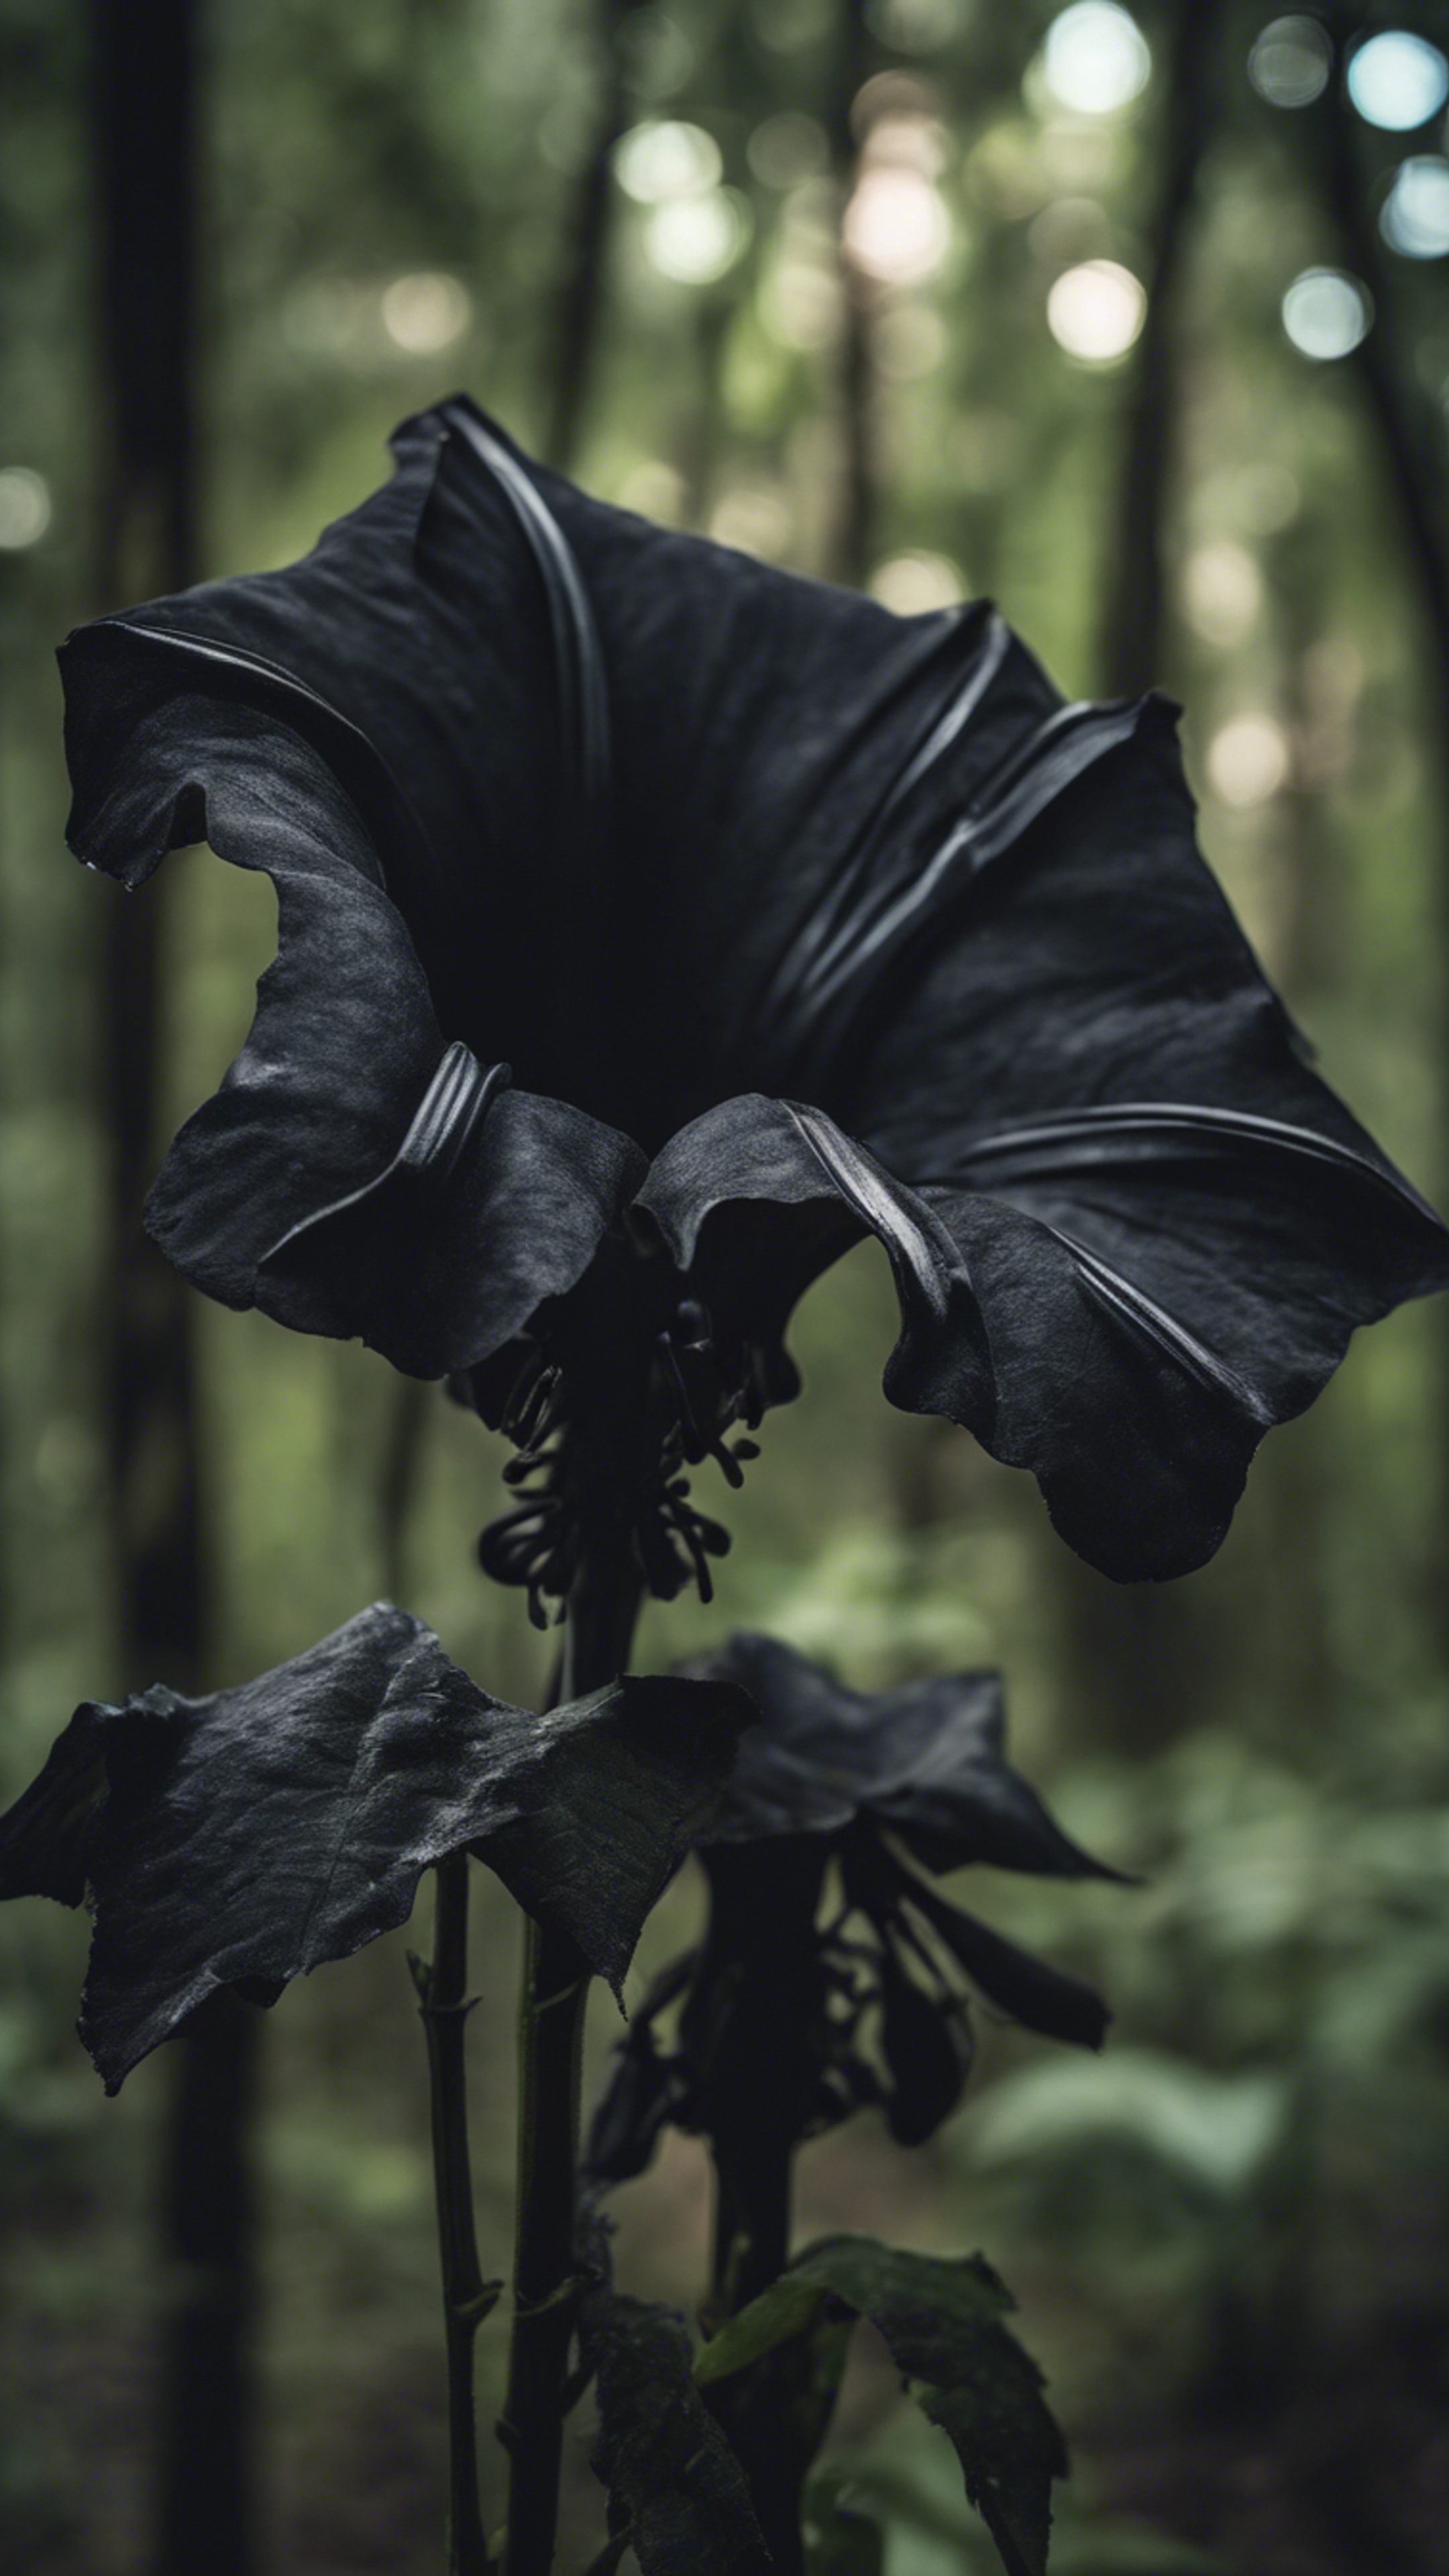 A black trumpet flower evoking an eerie yet captivating atmosphere in the heart of a dense forest. Wallpaper[87d98efd7999478c8568]